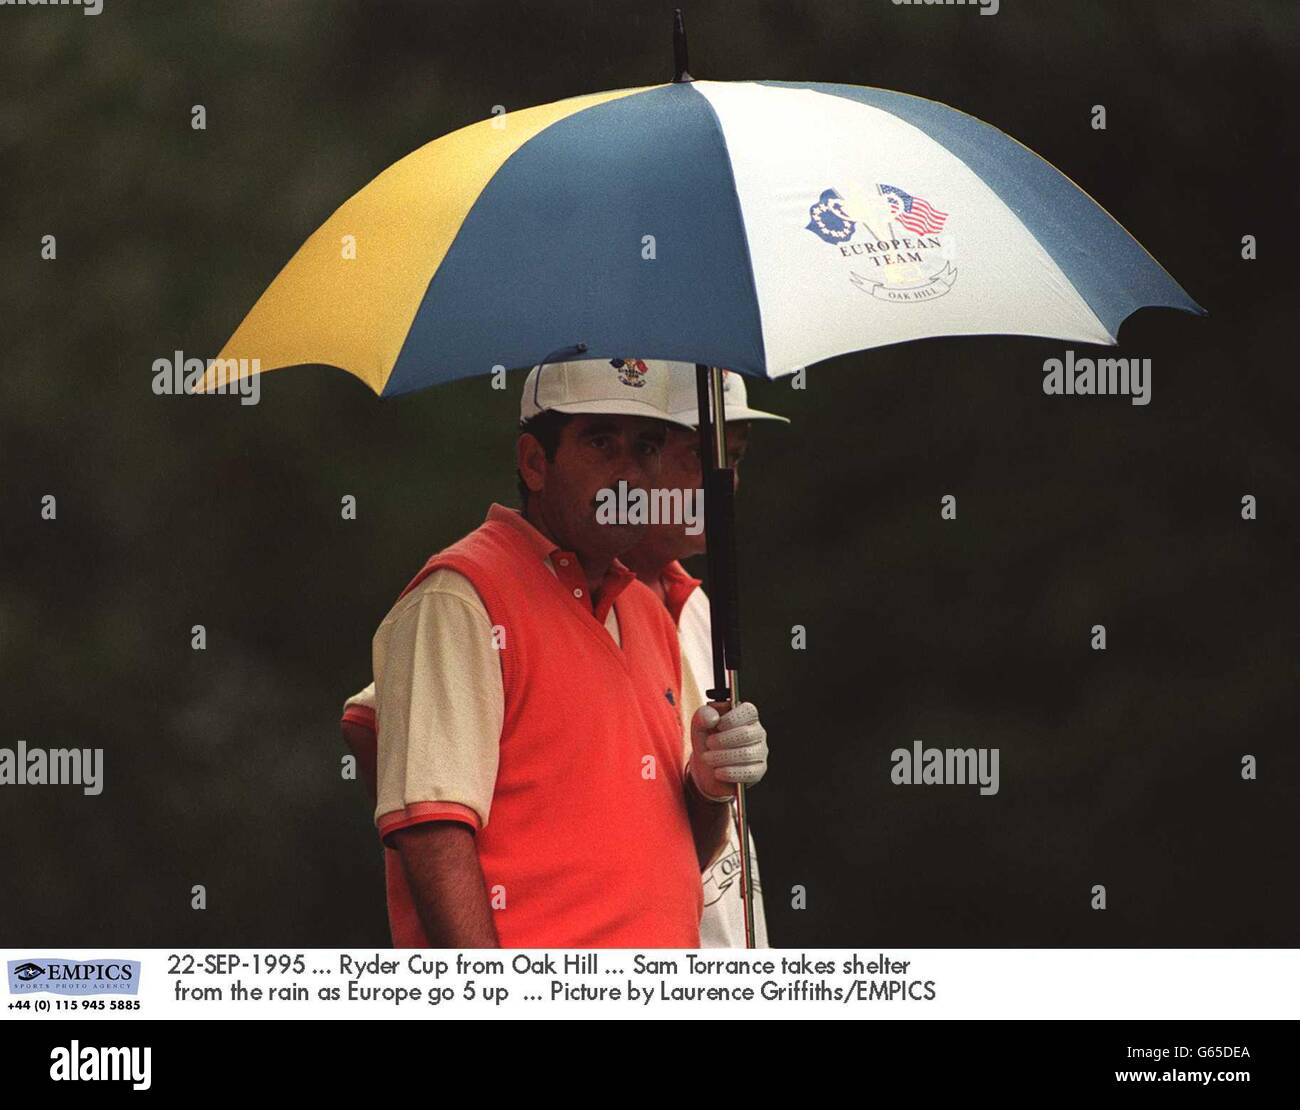 22-SEP-1995, Ryder Cup from Oak Hill, Sam Torrance takes shelter from the rain as Europe go 5 up, Picture by Laurence Griffiths/EMPICS Stock Photo